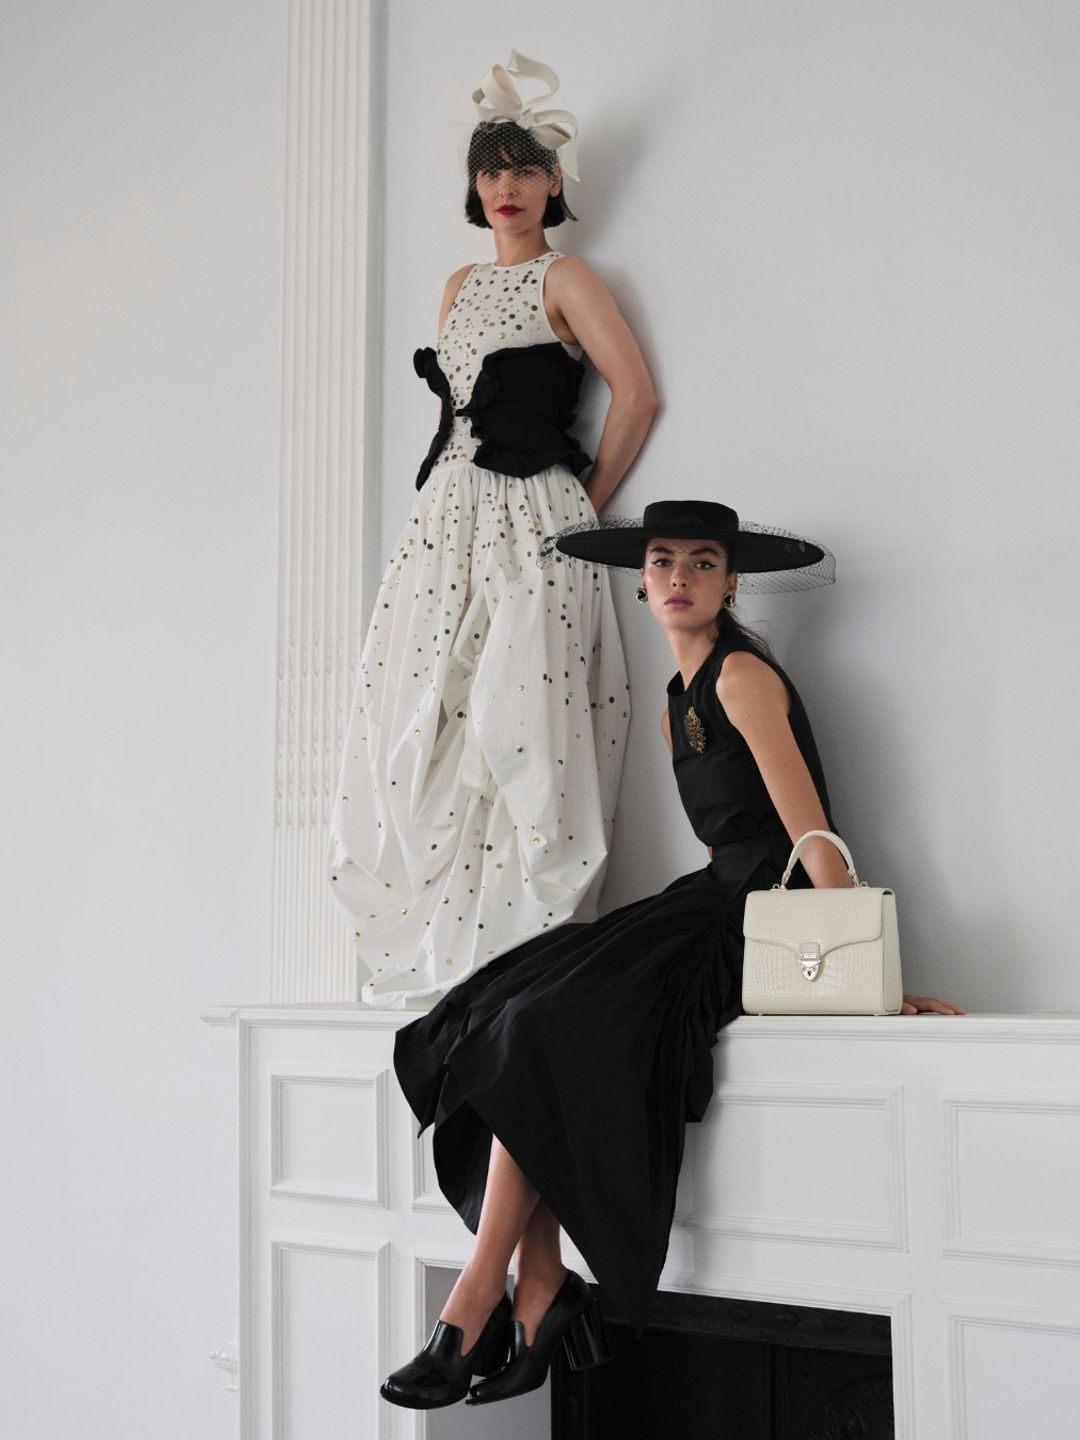 Two models pose in dresses as part of Royal Ascot's new lookbook